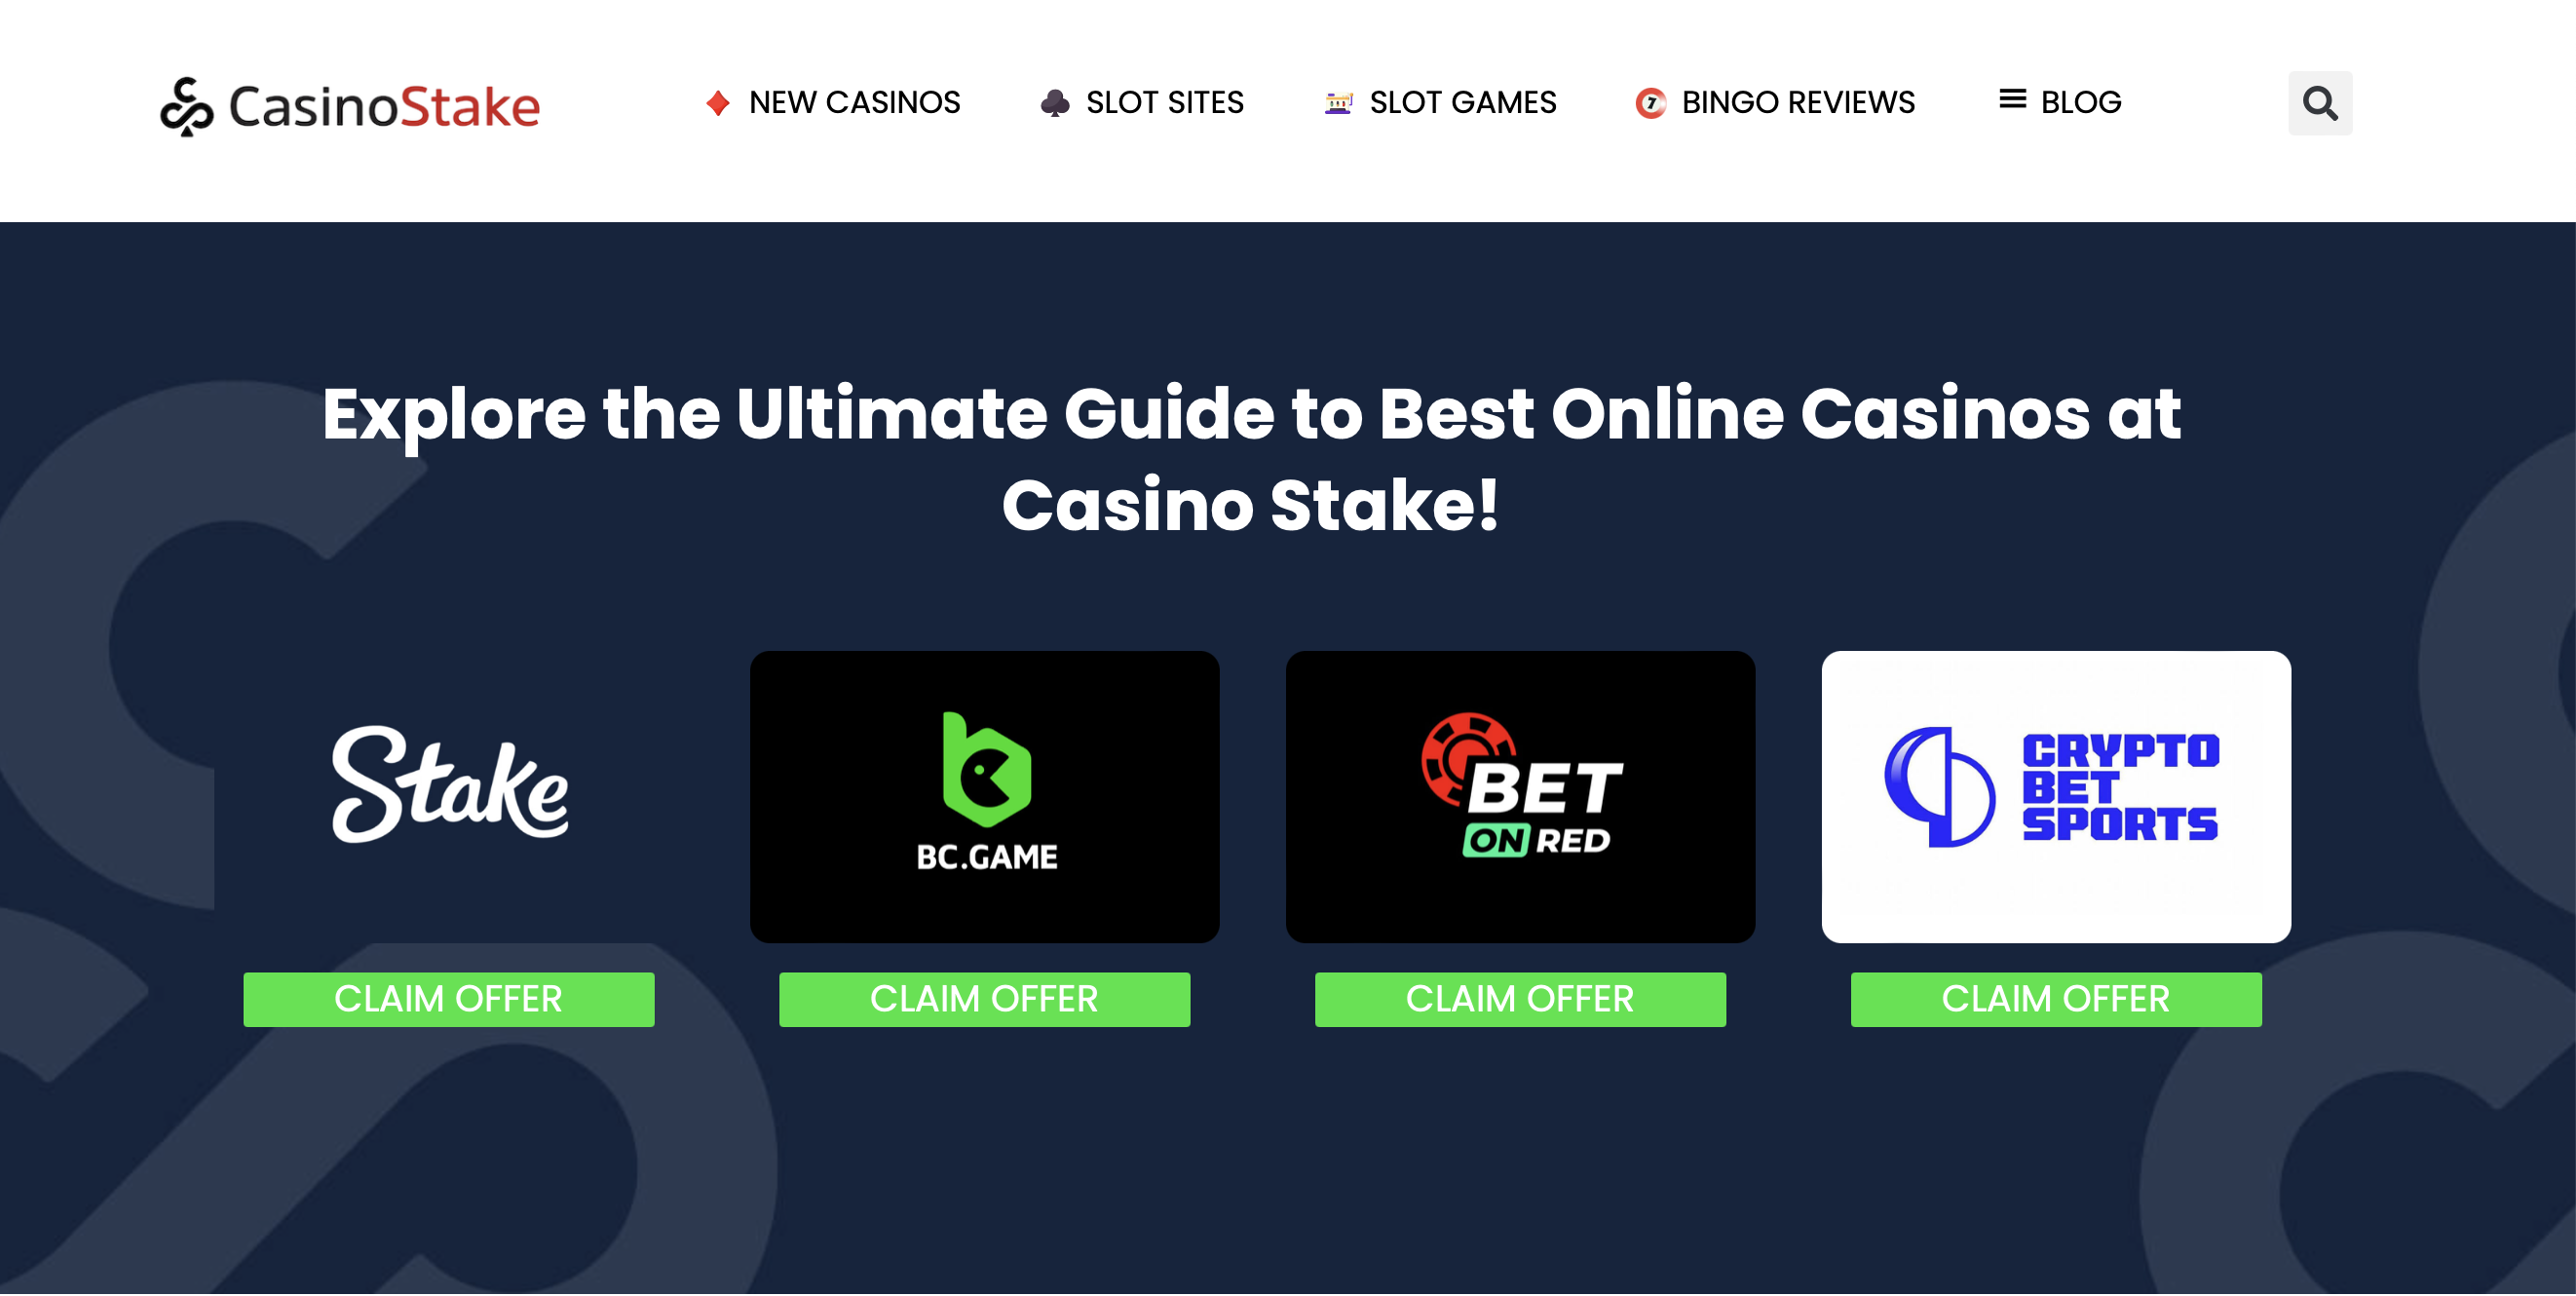 Casino Stake Affiliate Website is Launched